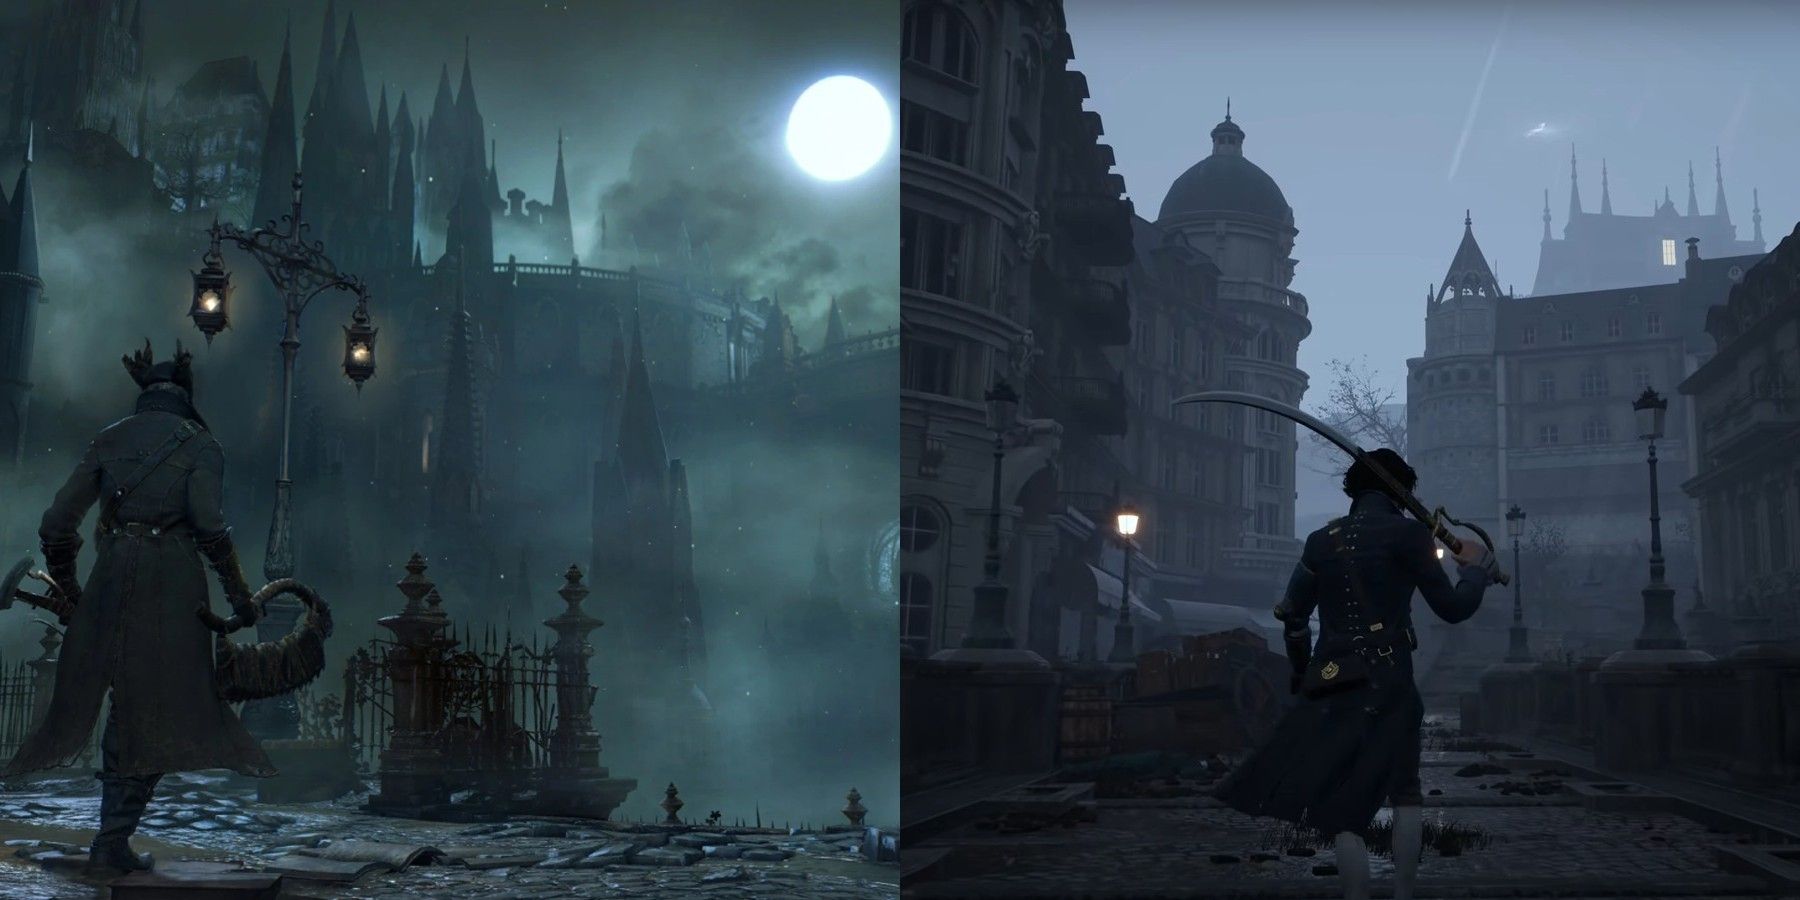 Video Game 'Bloodborne' Forges Connections During Quarantine : NPR